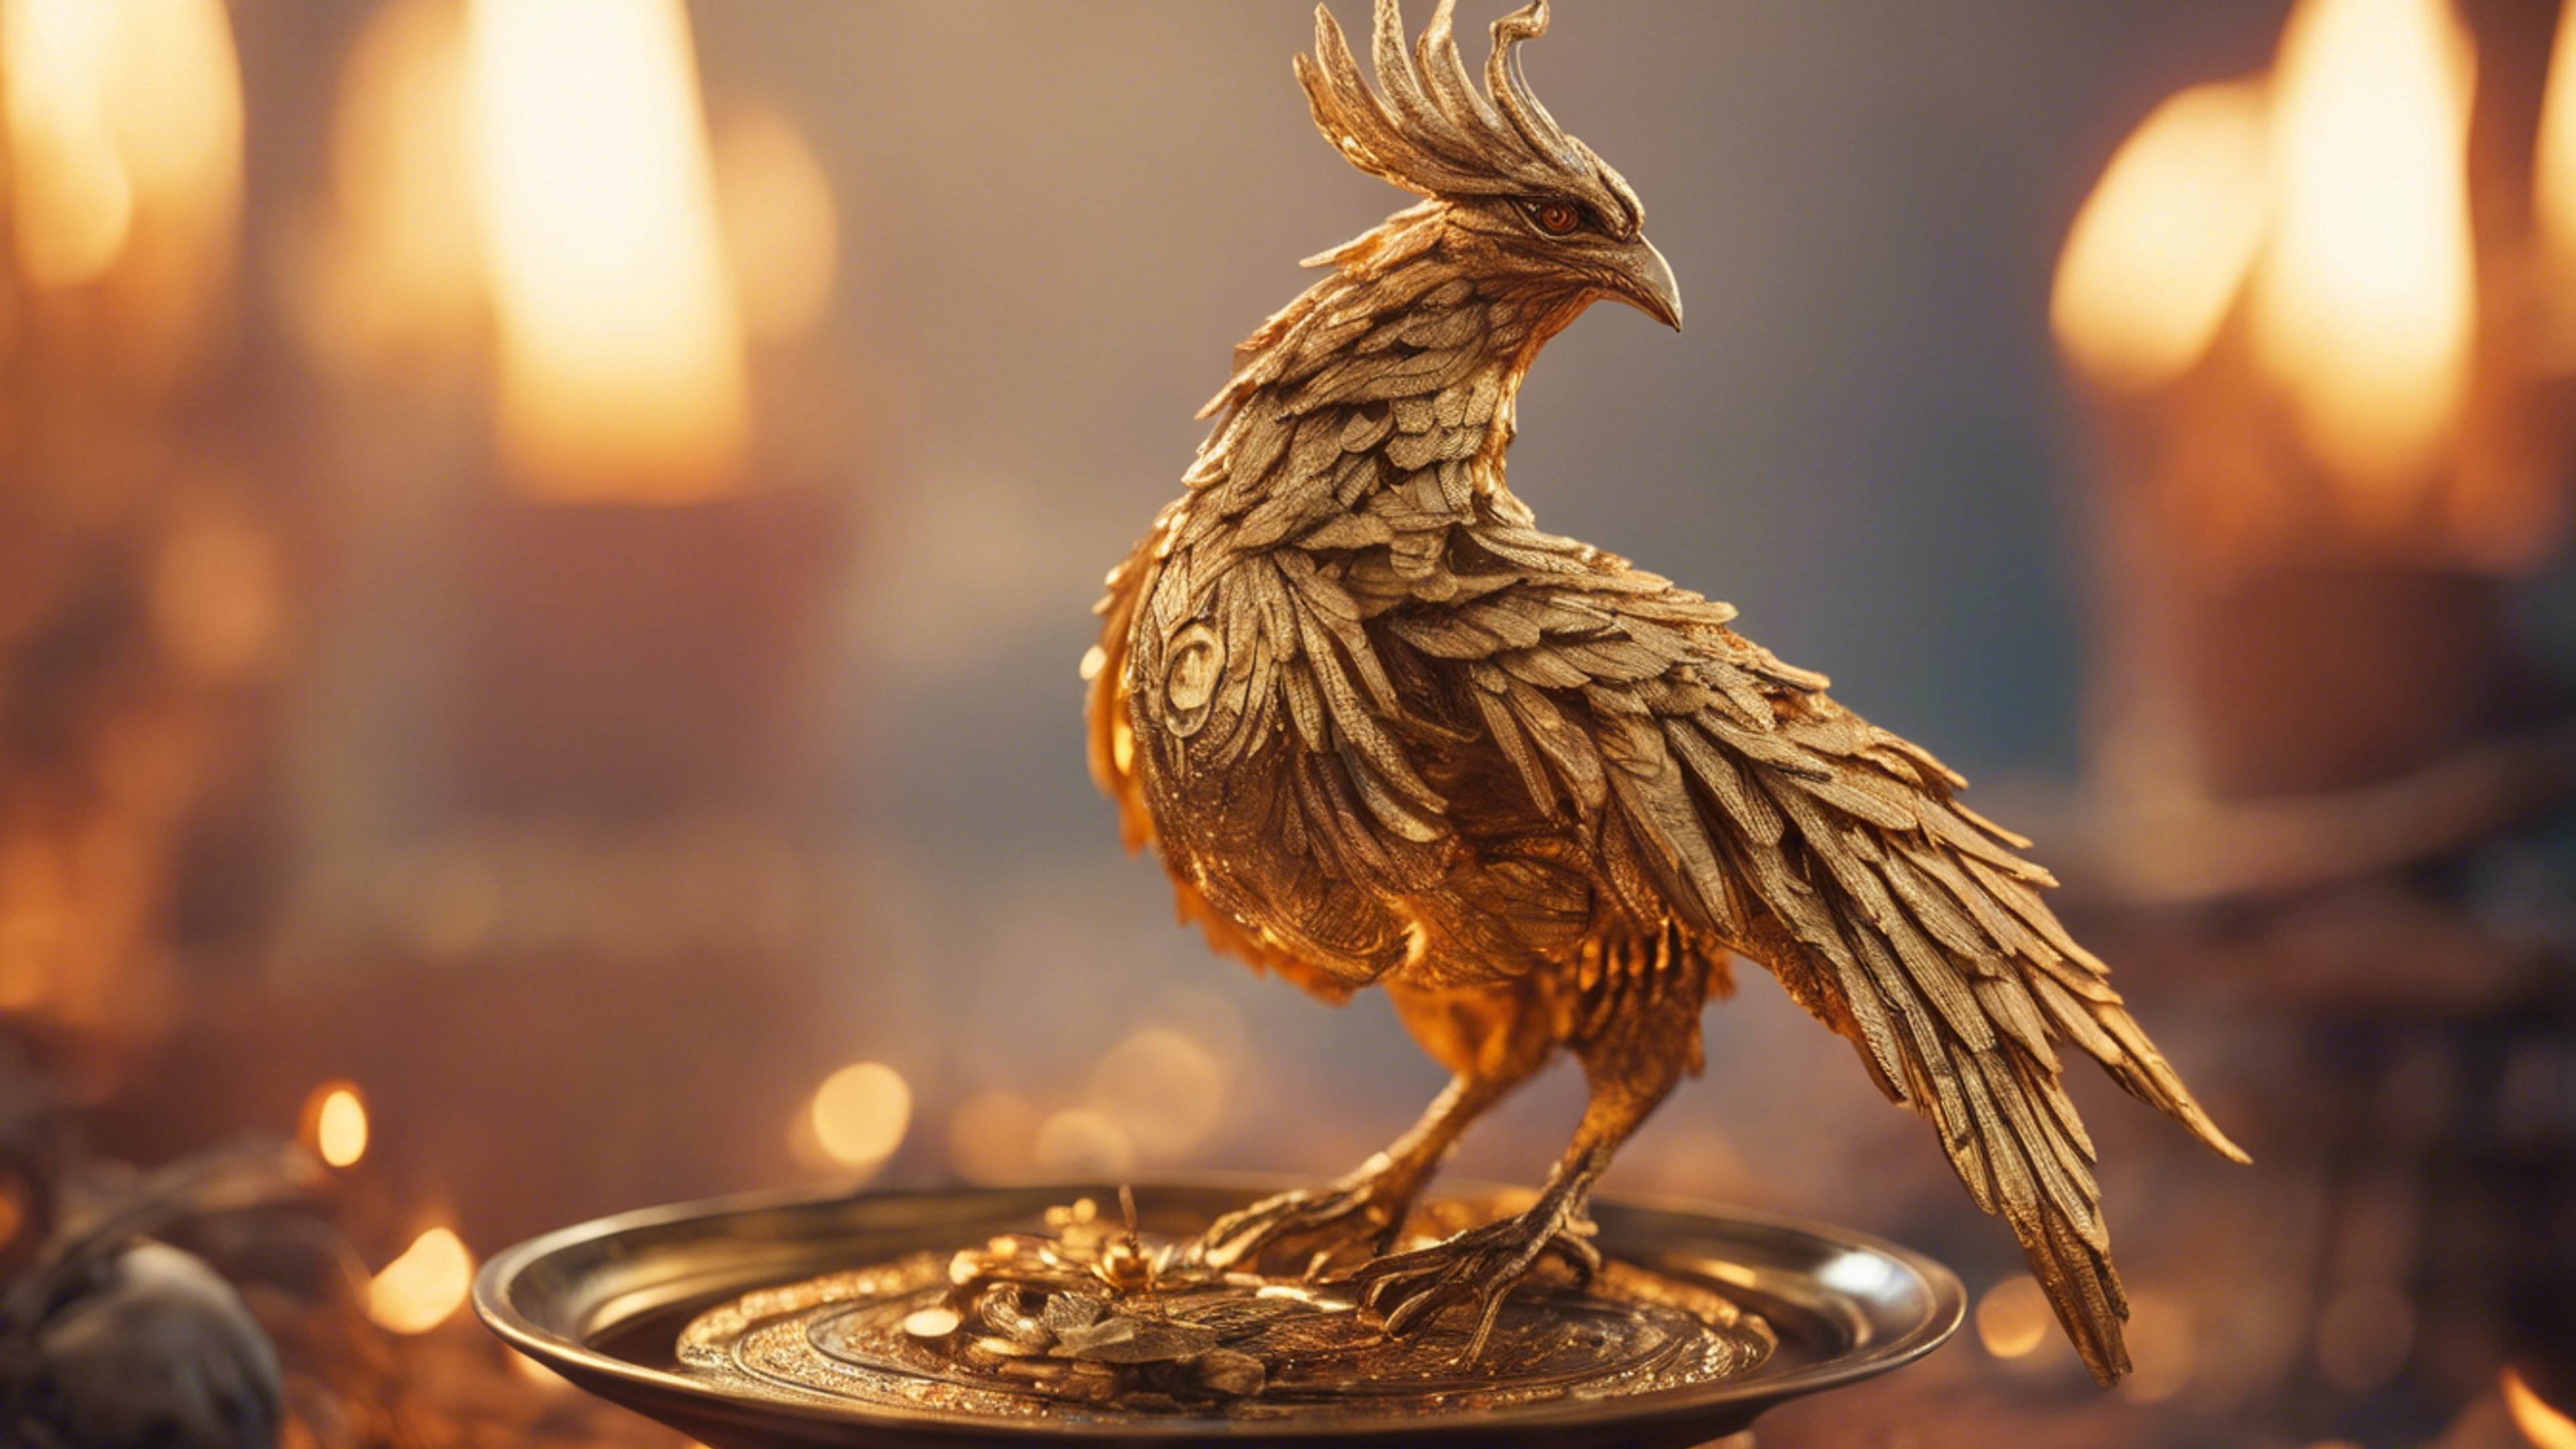 A golden miniature phoenix, eyes reflecting wisdom and compassion, nestling within Storyteller's hands as he spins tales around a fire.壁紙[cec667448c87460c8fc2]